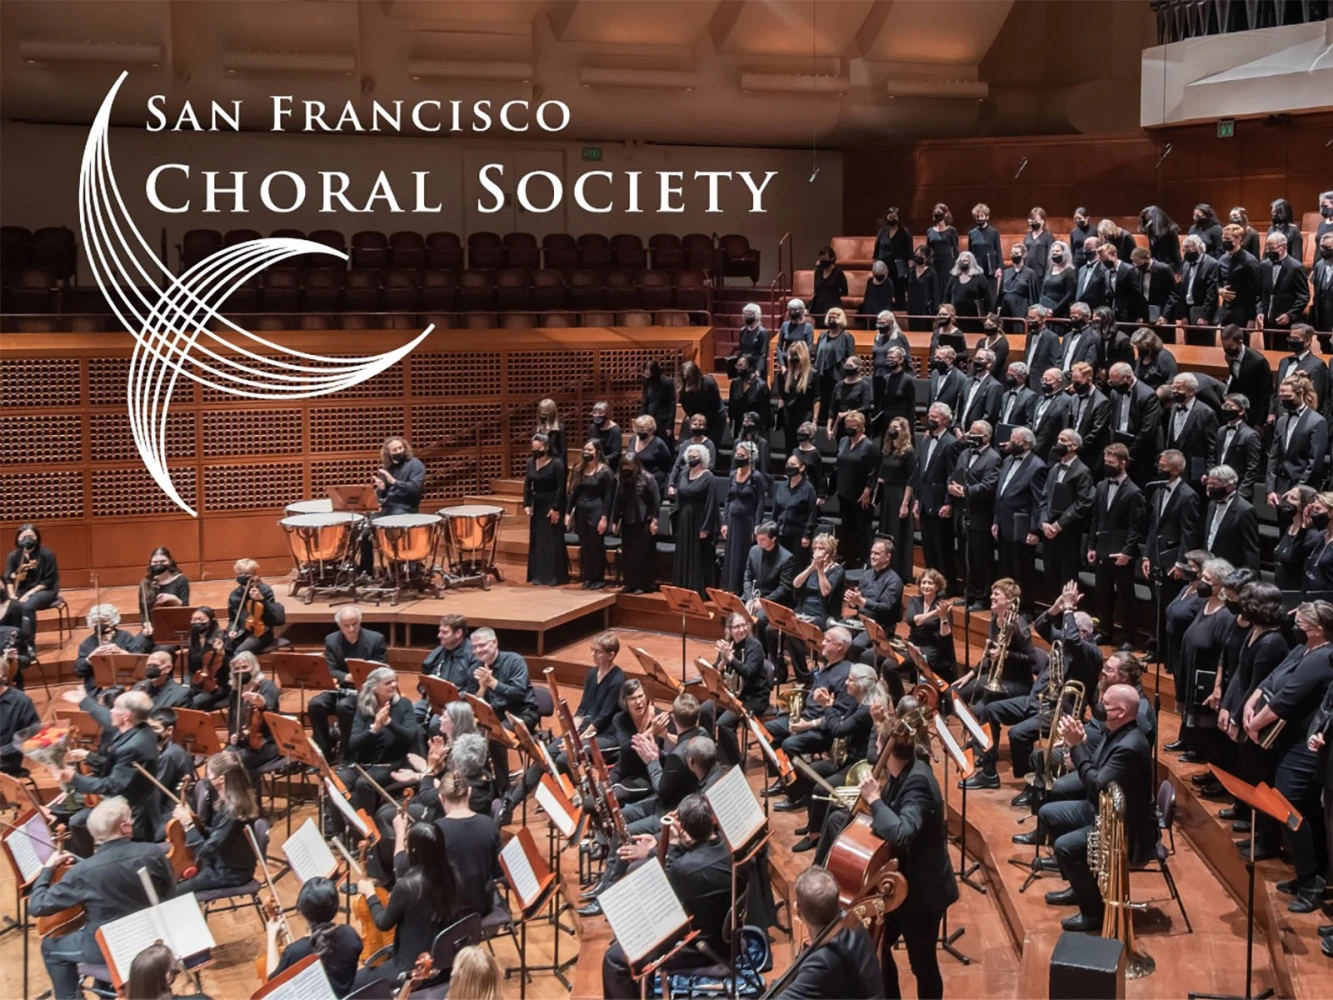 San Francisco Choral Society - Summer Festival Chorus: Mozart Requiem and Shchetynsky Requiem: What to expect - 2